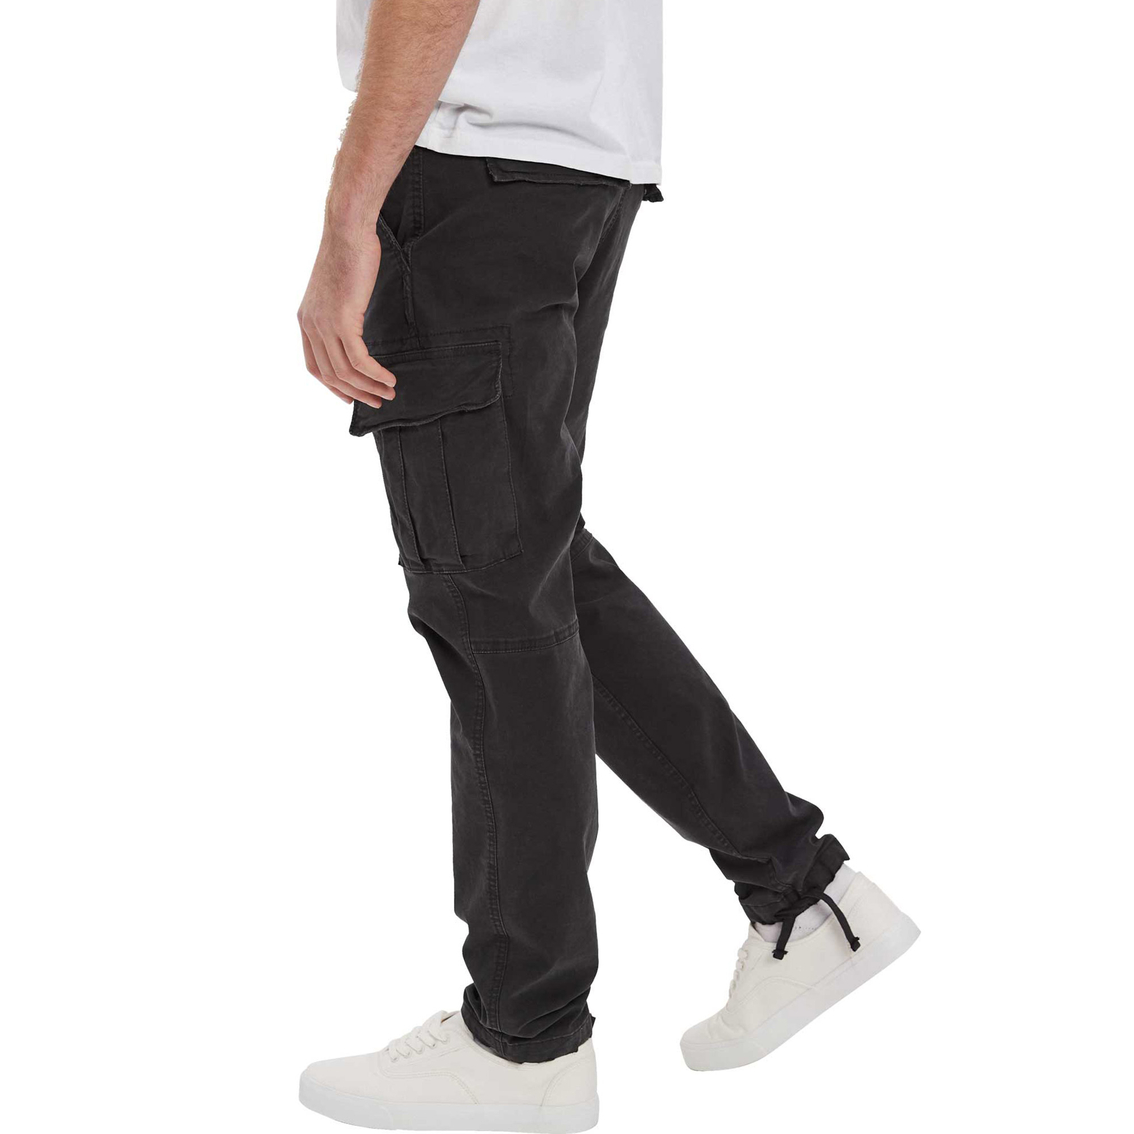 American Eagle Flex Slim Lived In Cargo Pants | Pants | Clothing ...